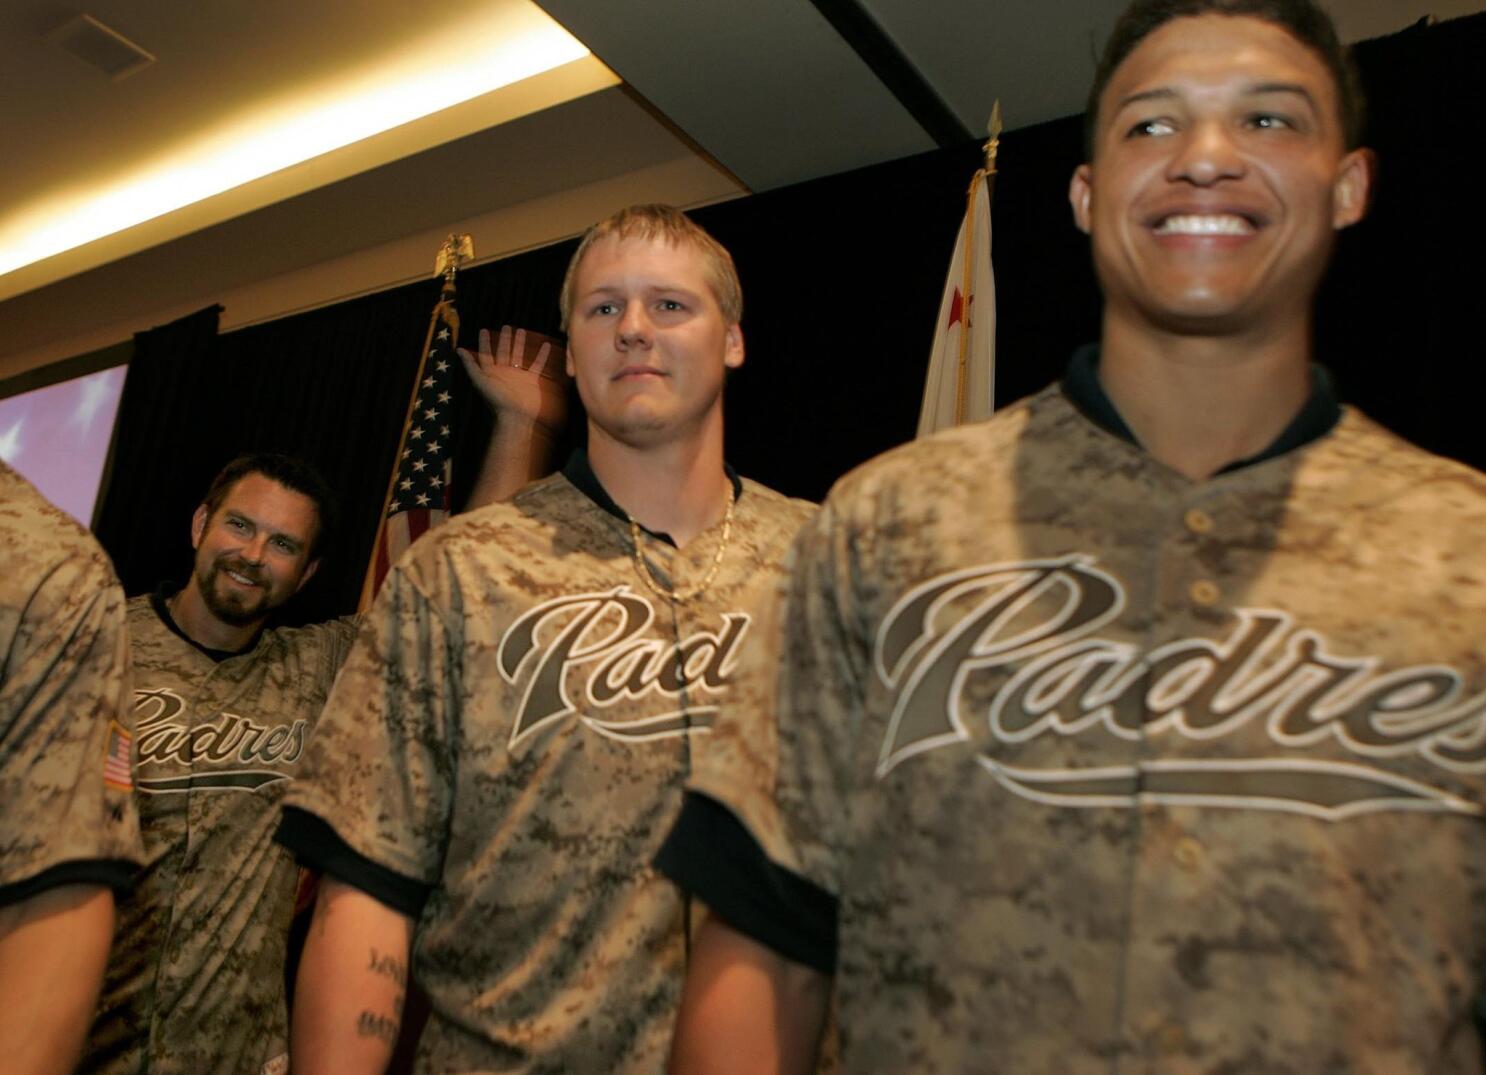 camo padres military jersey